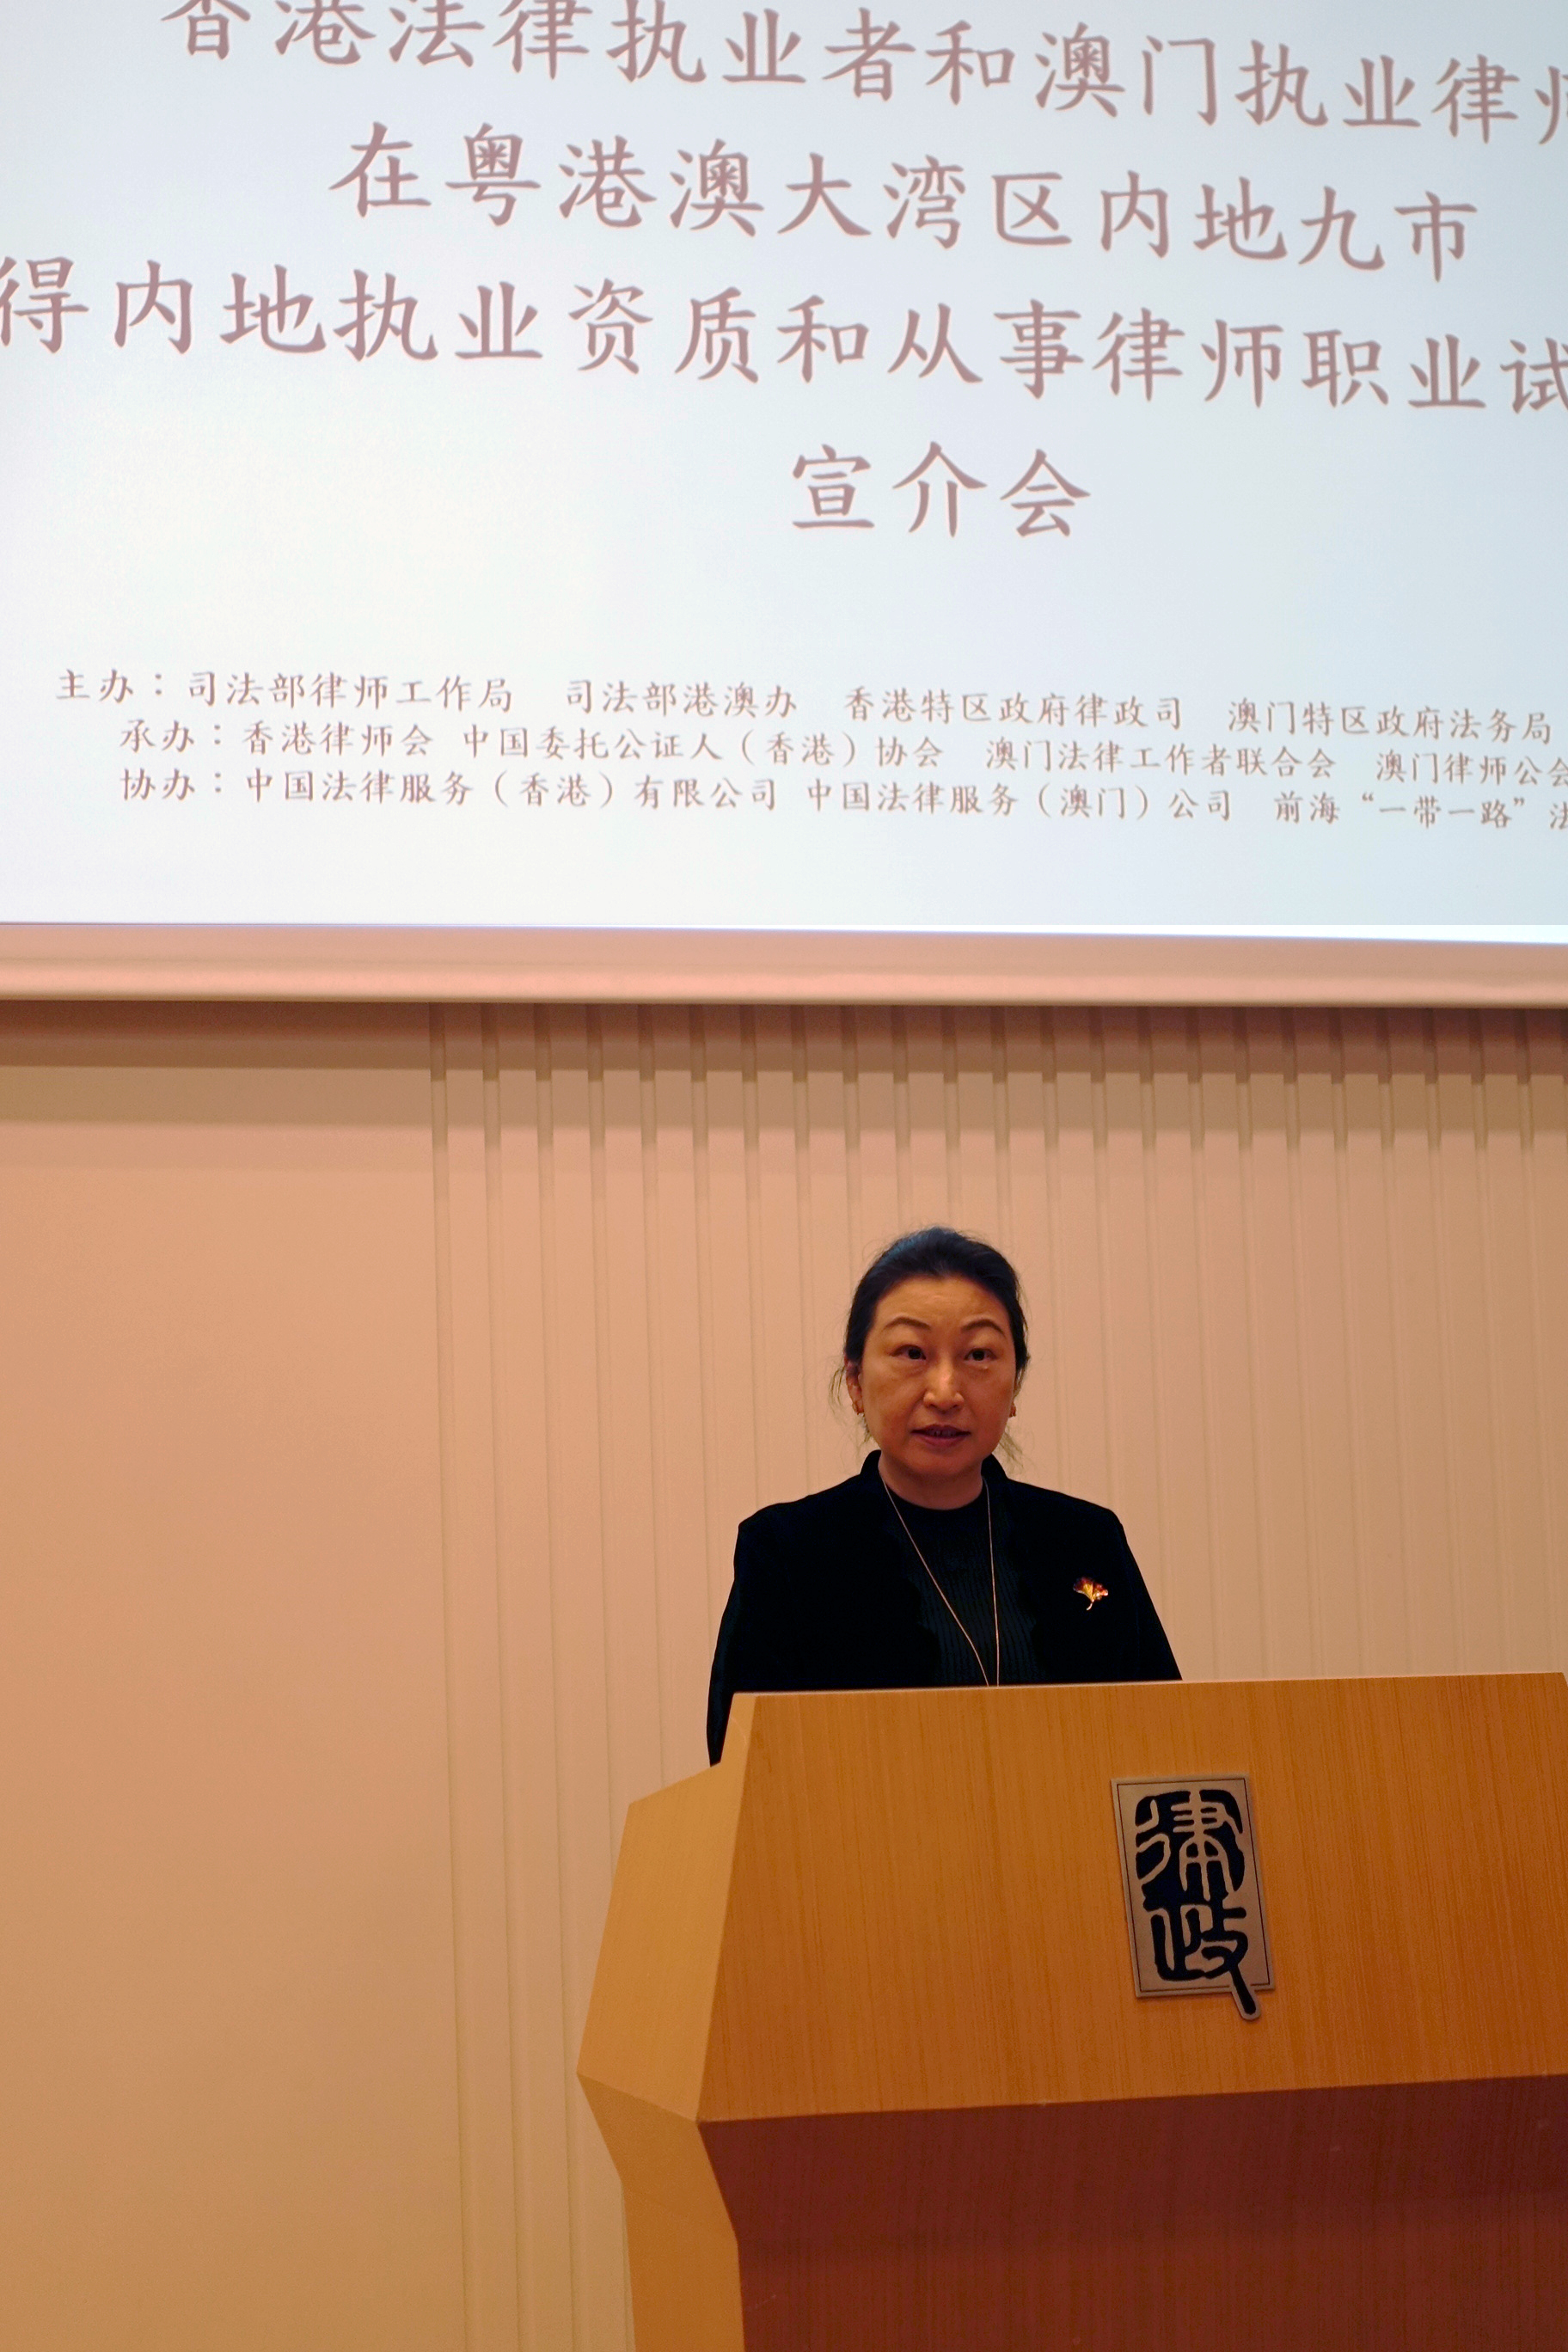 SJ speaks at briefing on obtaining Mainland practice qualifications to practise law in the Greater Bay Area 